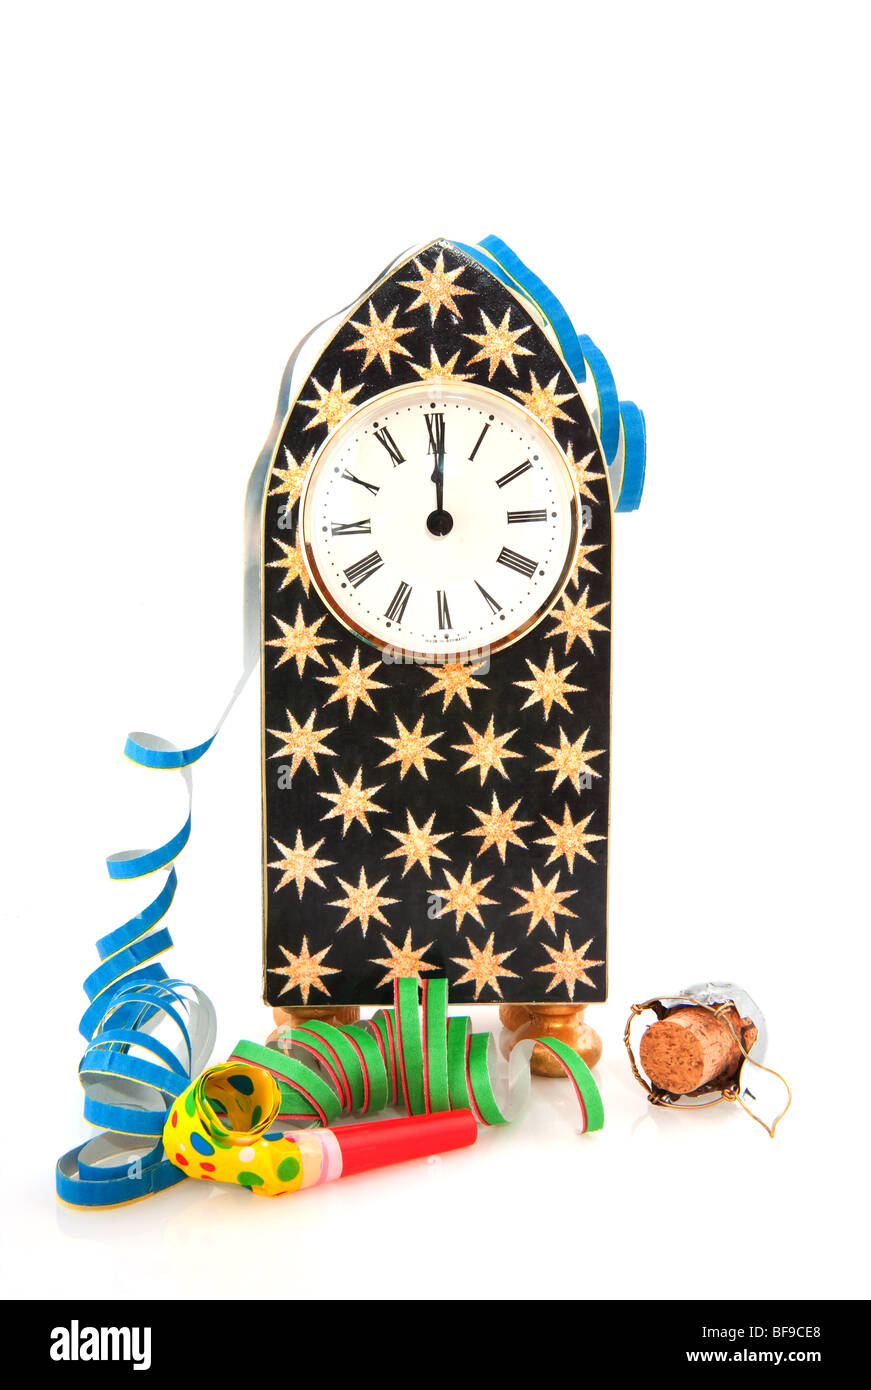 Twelve O'Clock with fireworks at new years eve Stock Photo